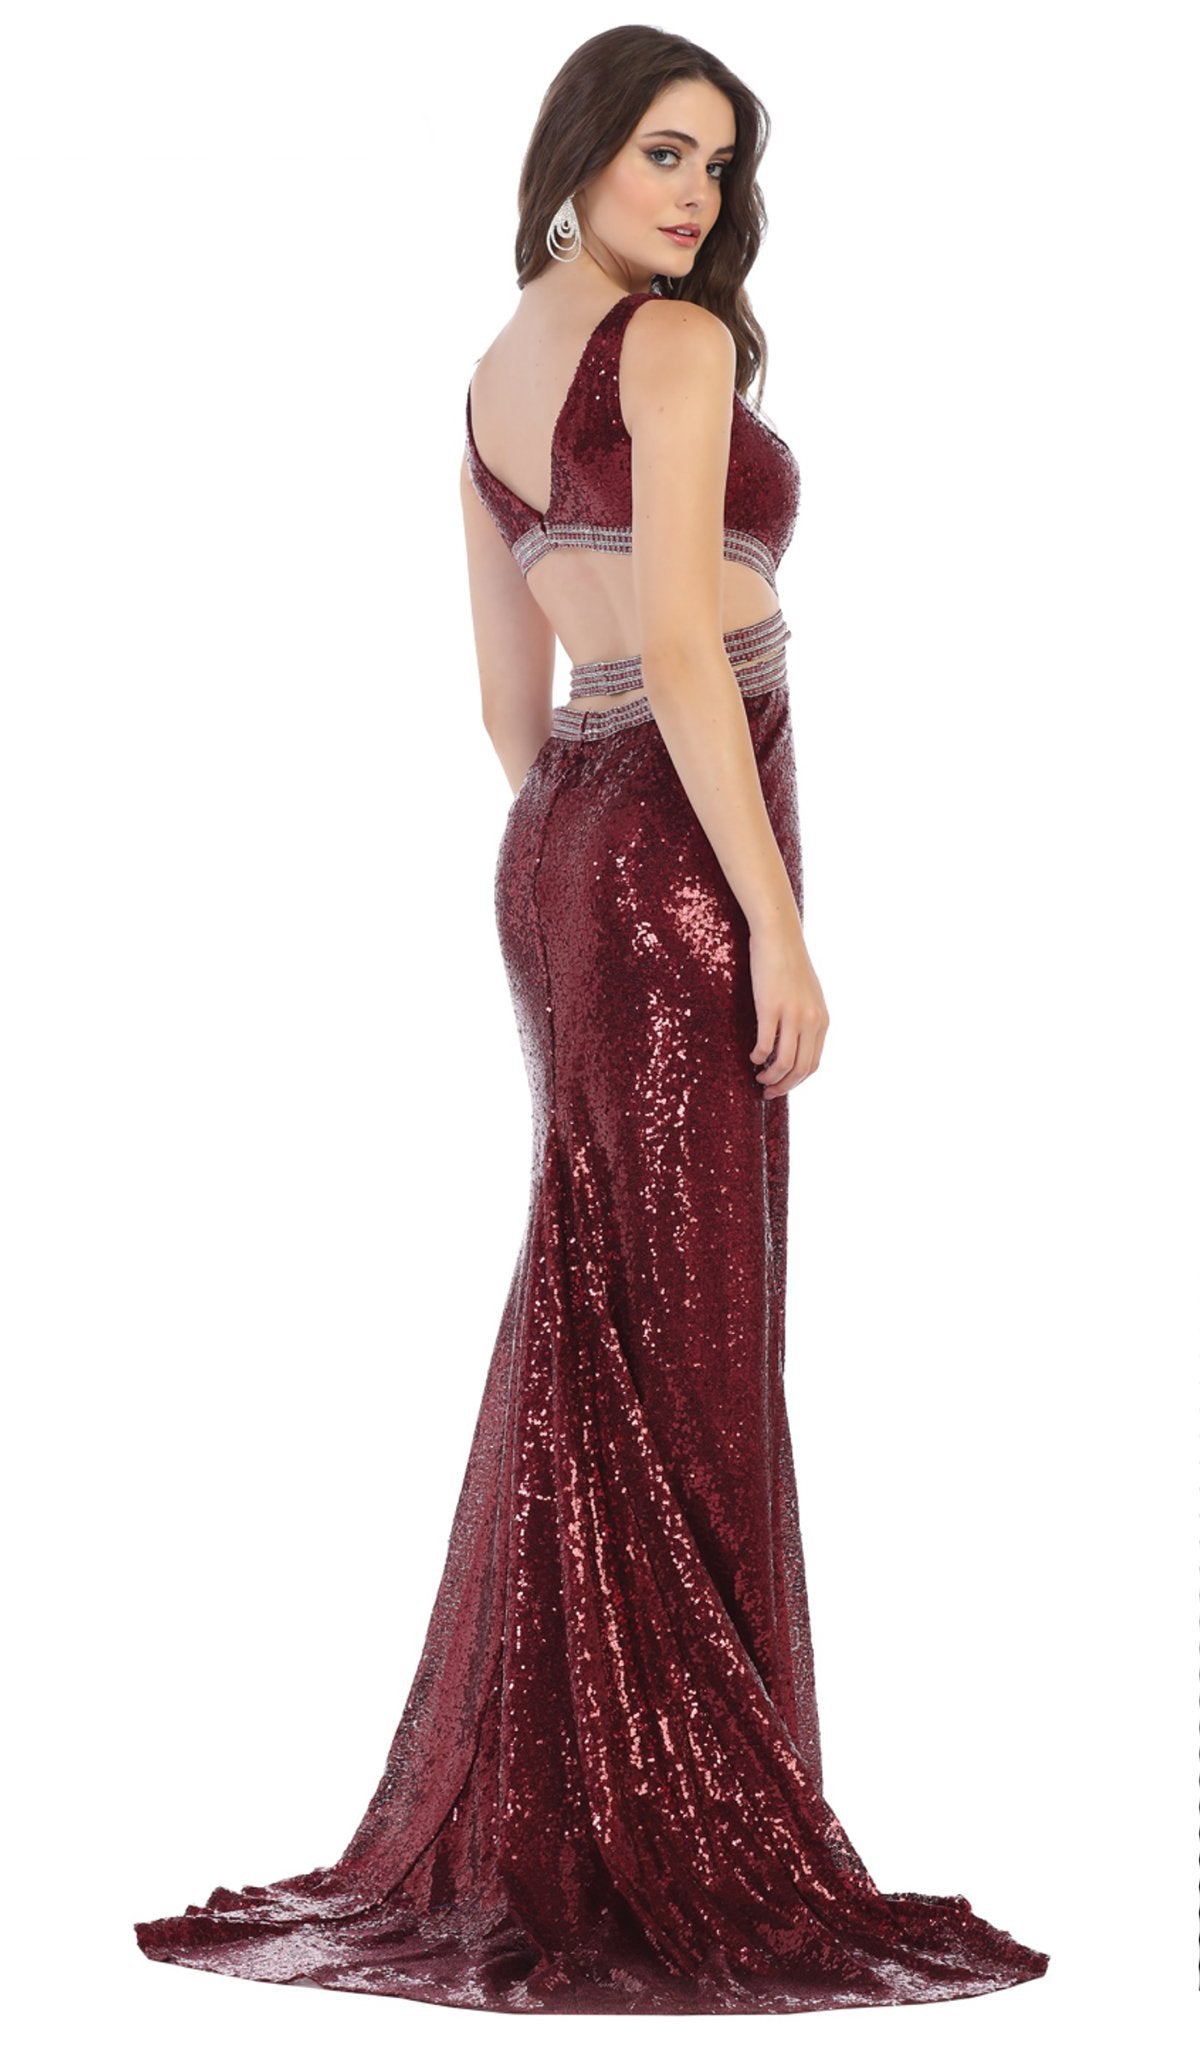 May Queen - RQ7648 Cutout Ornate Sequined High Slit Gown In Red